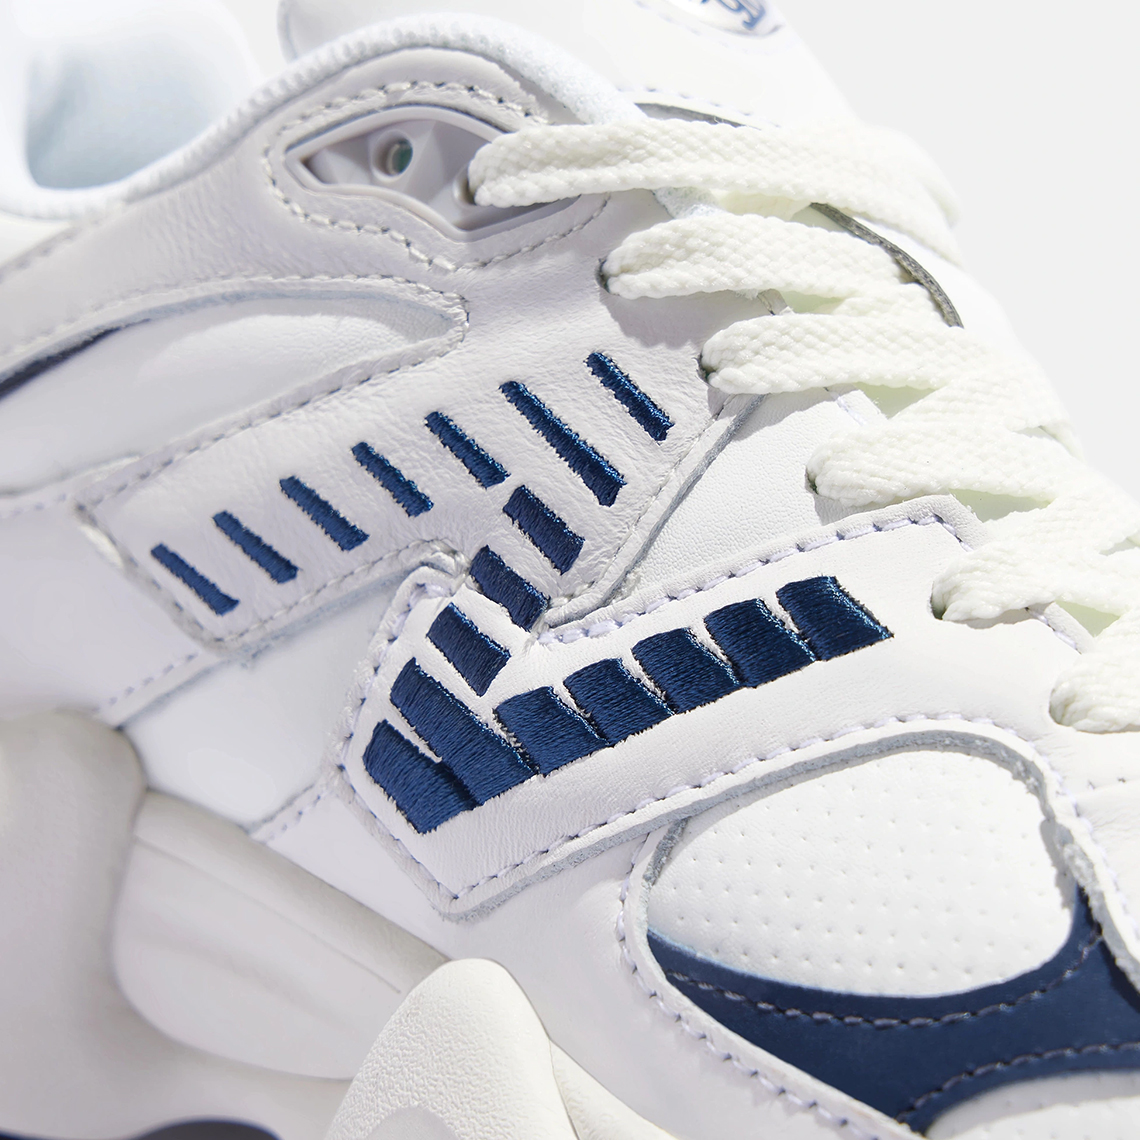 White And Navy Shades Propose A Dad-Ready New Balance 9060